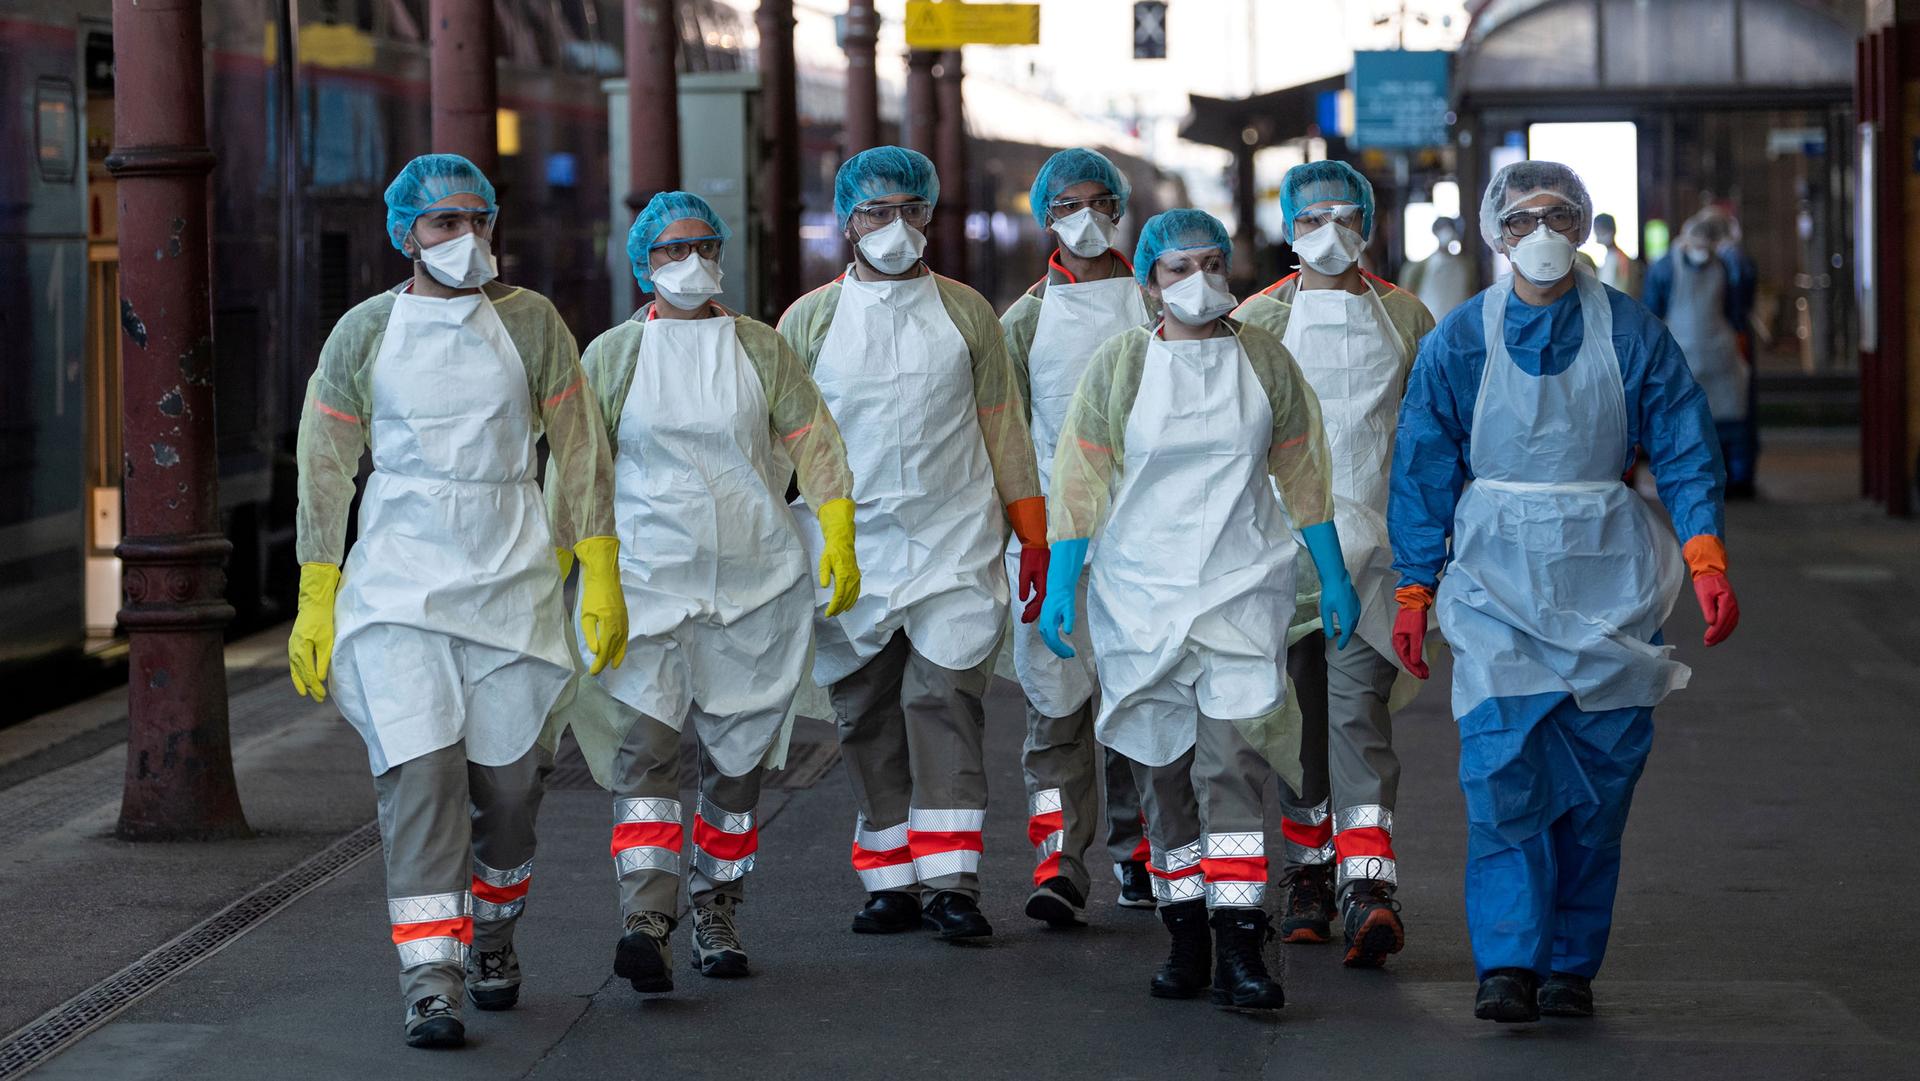 A group of people in PPE